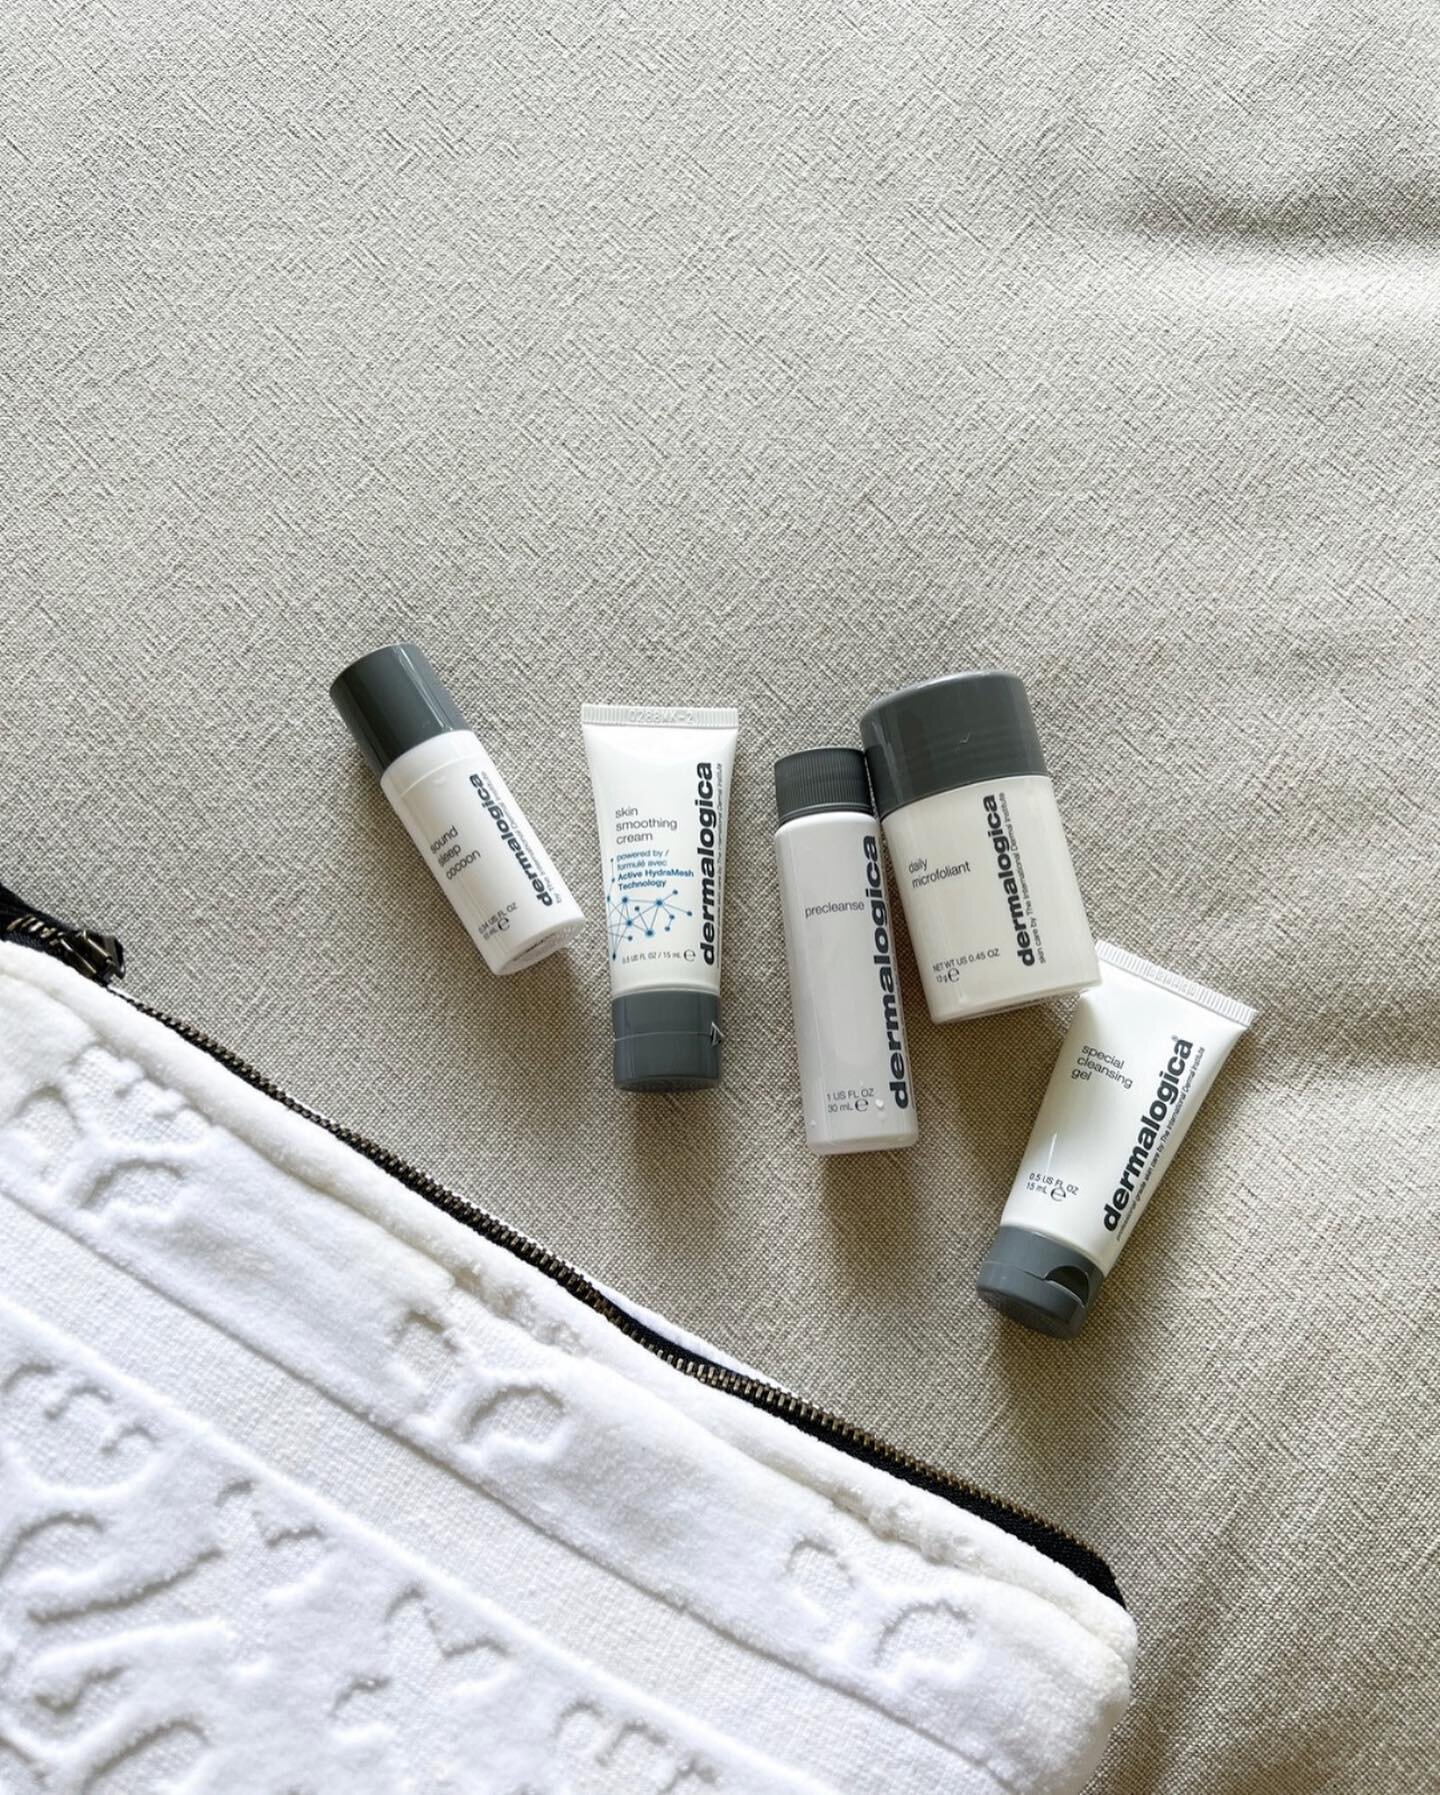 ✨ Don&rsquo;t skip the skin-care essentials while on holiday&rsquo;s! 
⠀⠀⠀⠀⠀⠀⠀⠀⠀
Whether you&rsquo;re jetting off to Bali or simply spending an extra day at home, here are our top @dermalogicaaus products for staying hydrated and protected while on v